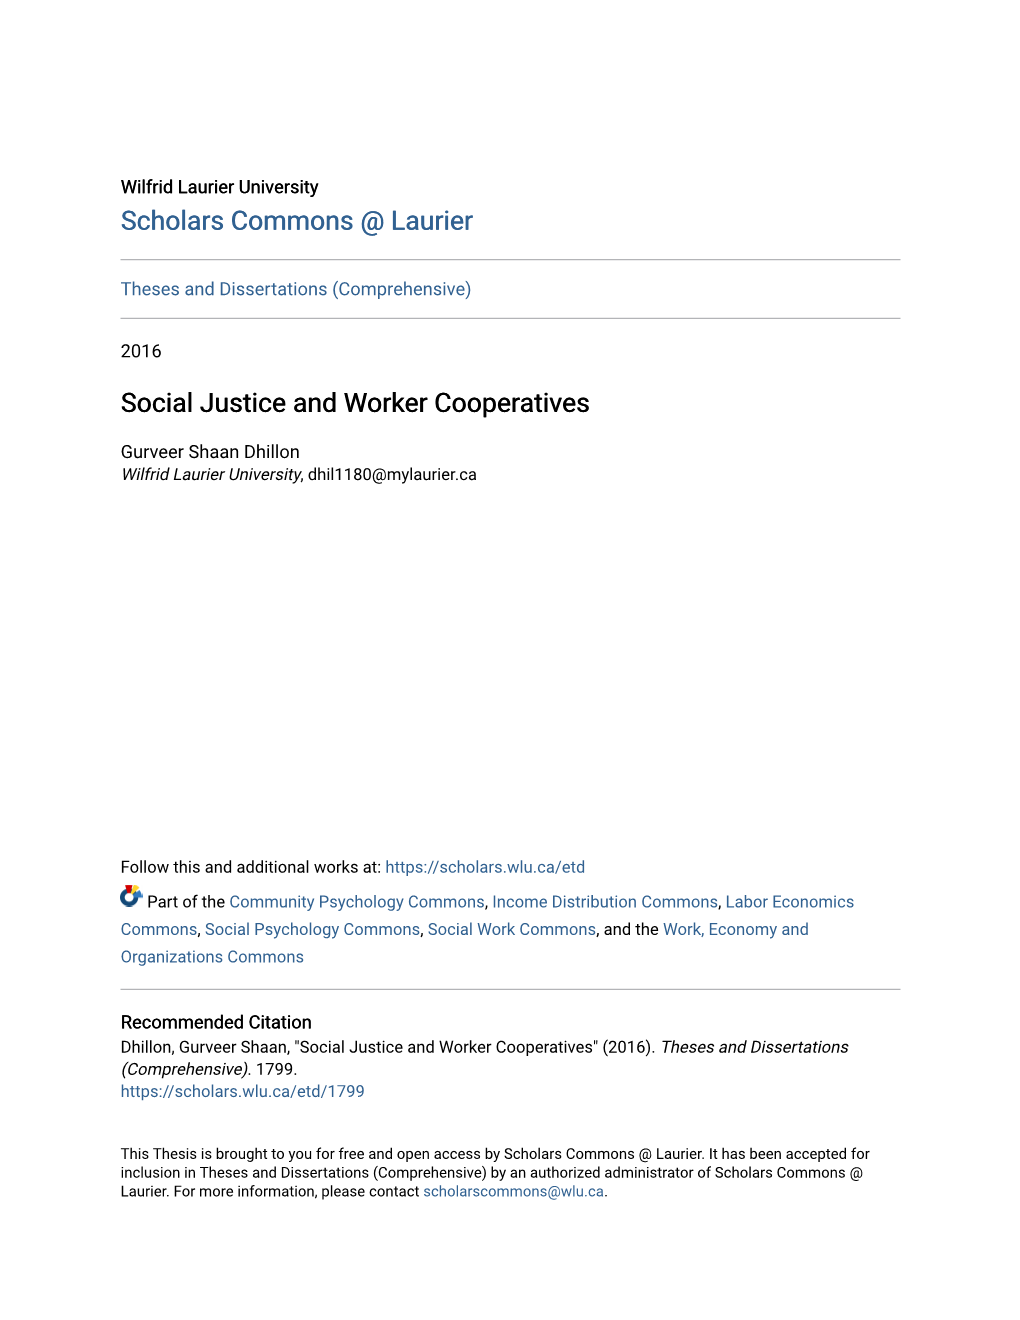 Social Justice and Worker Cooperatives